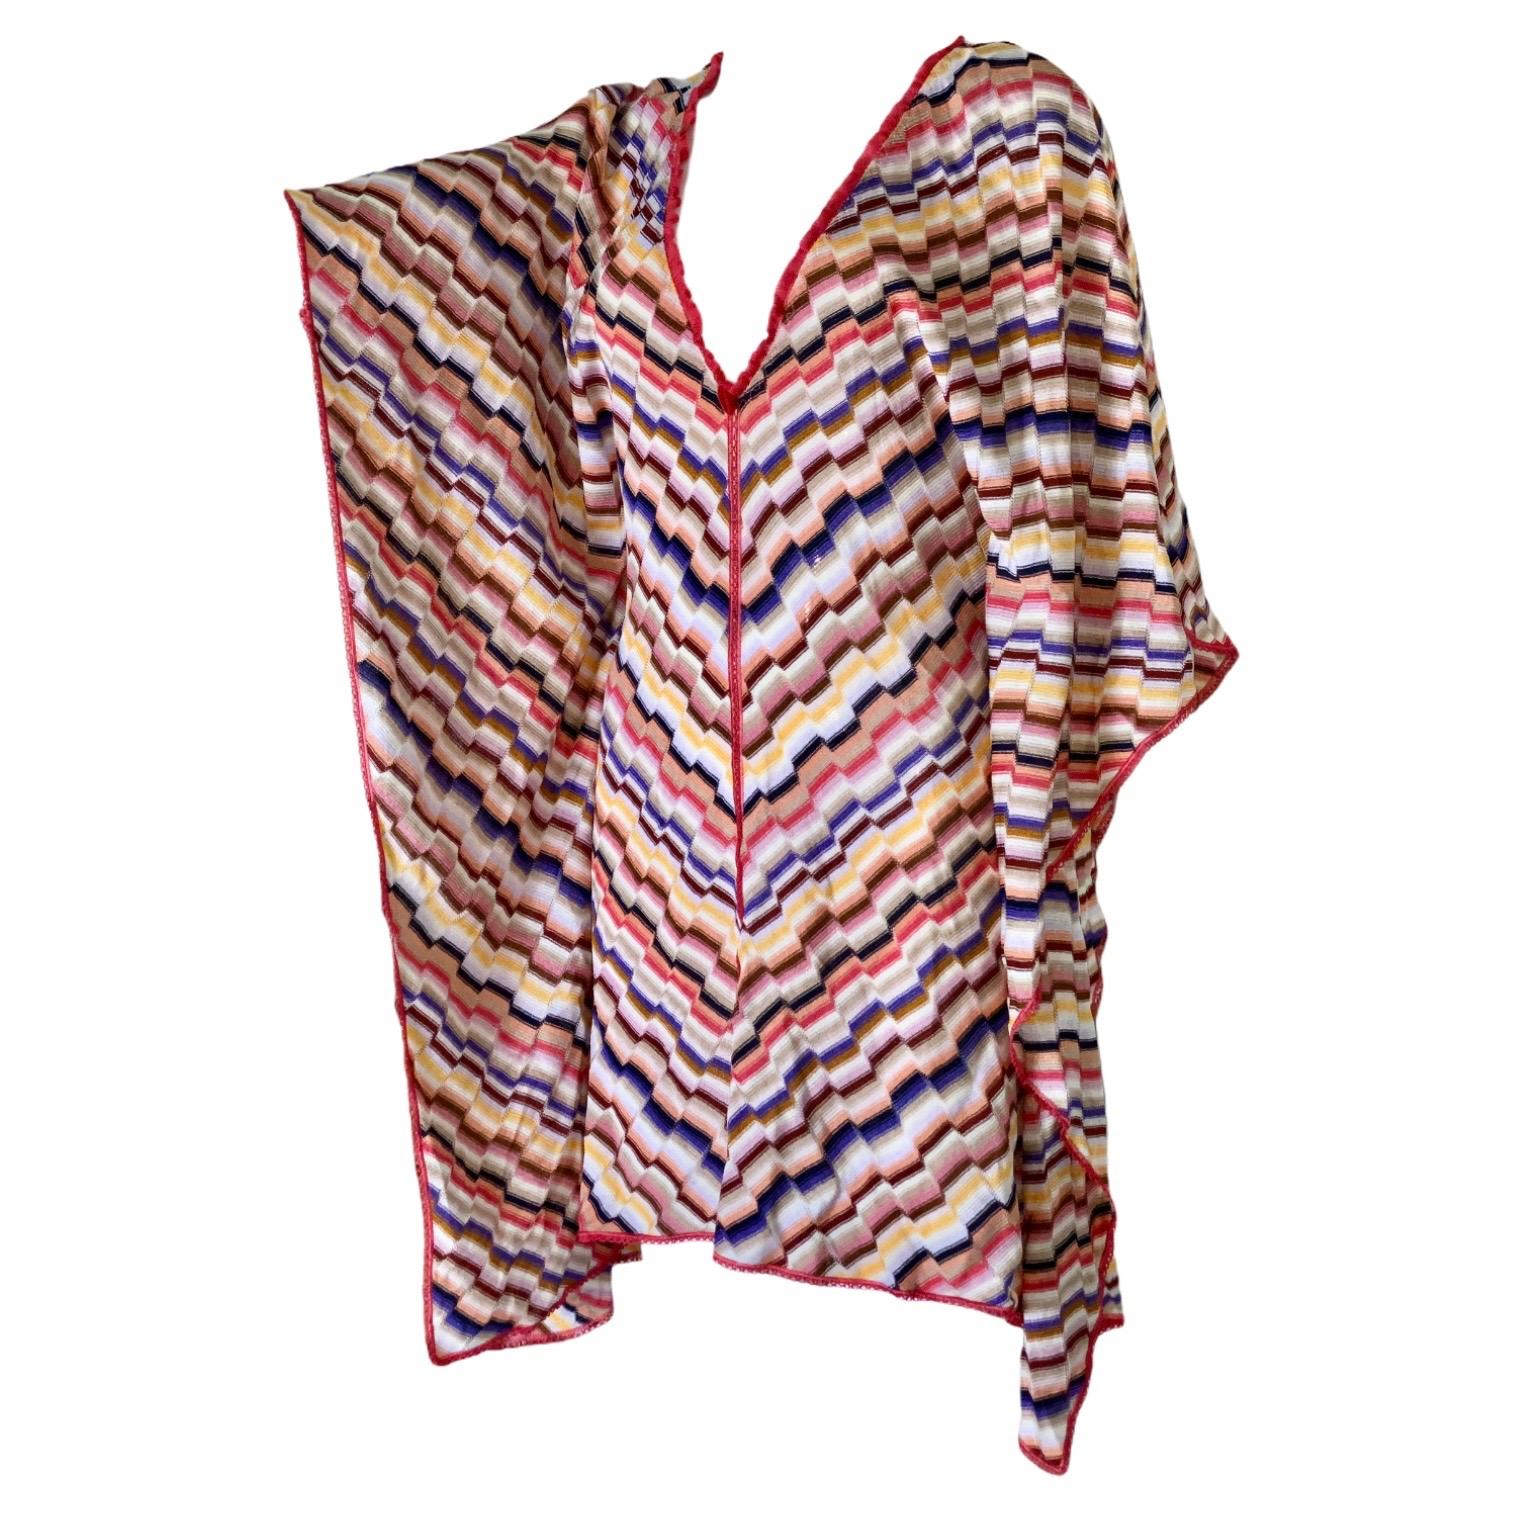 A signature Missoni knit caftan in a cascade of colors is the only piece you'll need this summer season

Multicolored knitted Missoni kaftan in beautiful pink colors
Plunging V-neckline
Simply slips on
Made in Italy
Dry Clean Only
Size S
New &